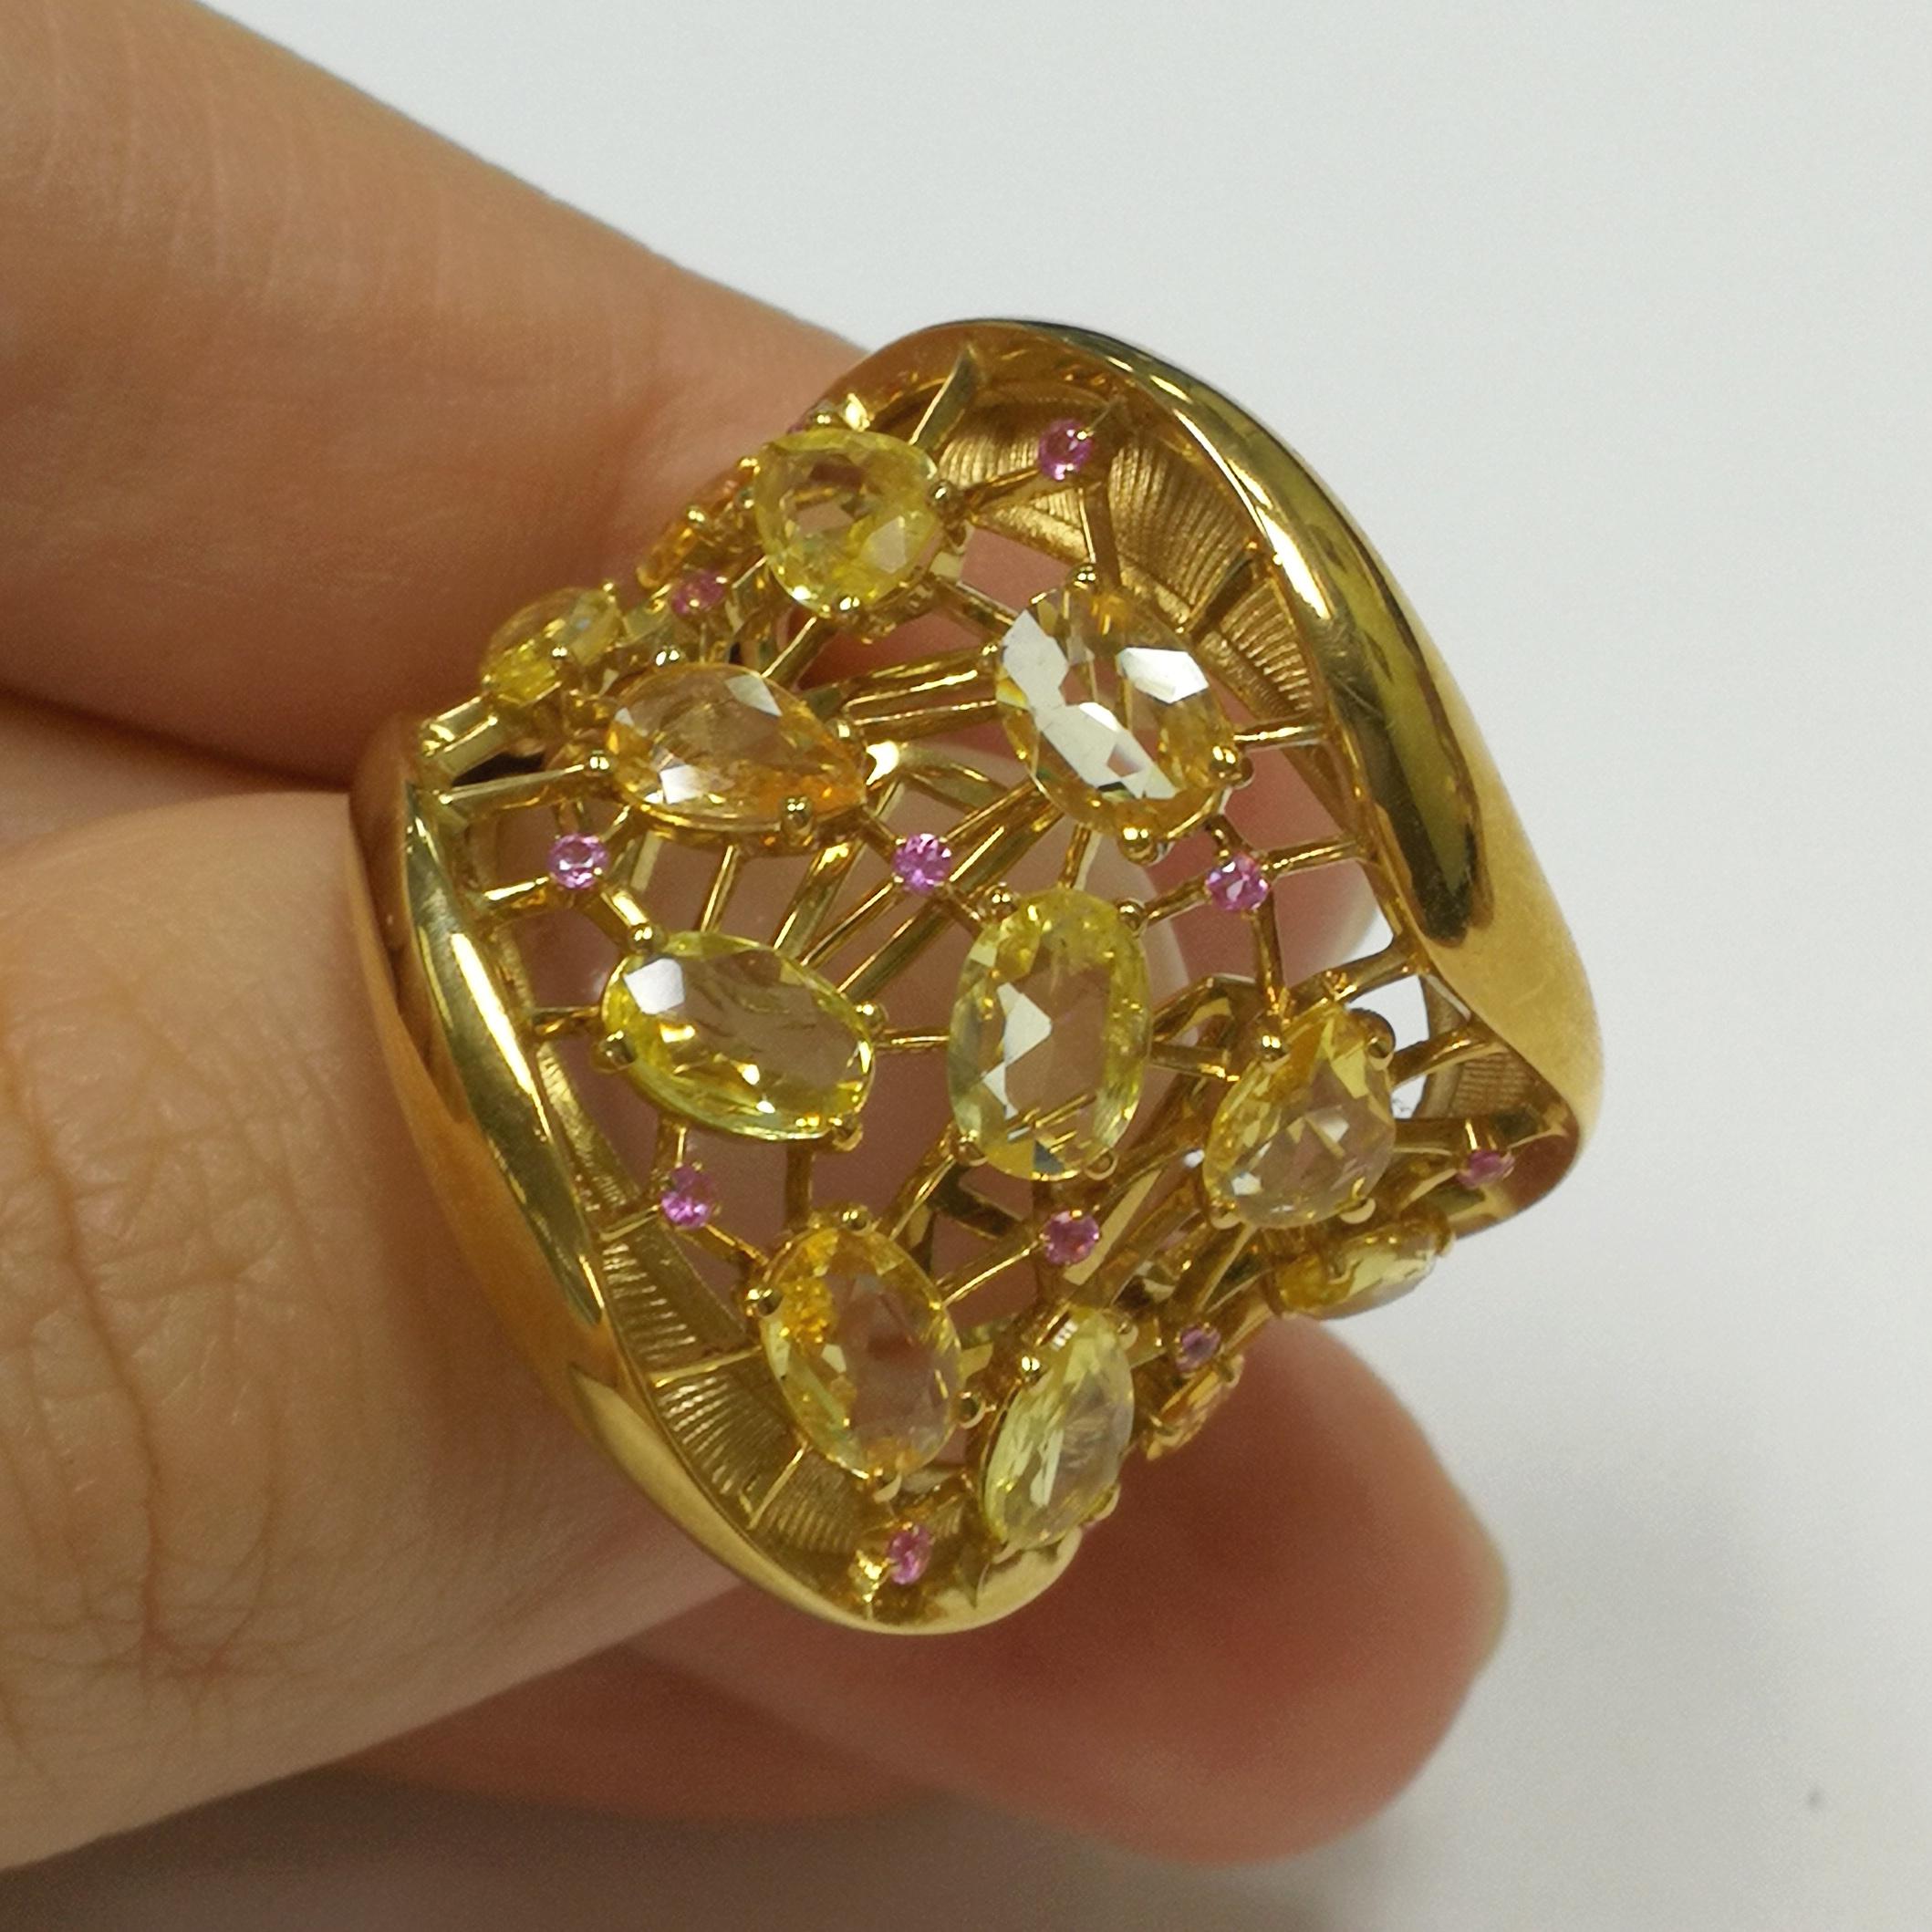 Yellow and Pink Sapphires 18 Karat Yellow Gold Splash Ring
As a sunbeam from darkness bursts into your hearts, this bright Ring! The middle of the Ring, made of 18 Karat Yellow Gold, resembles a plexus of thin strings, like a small cobweb into which